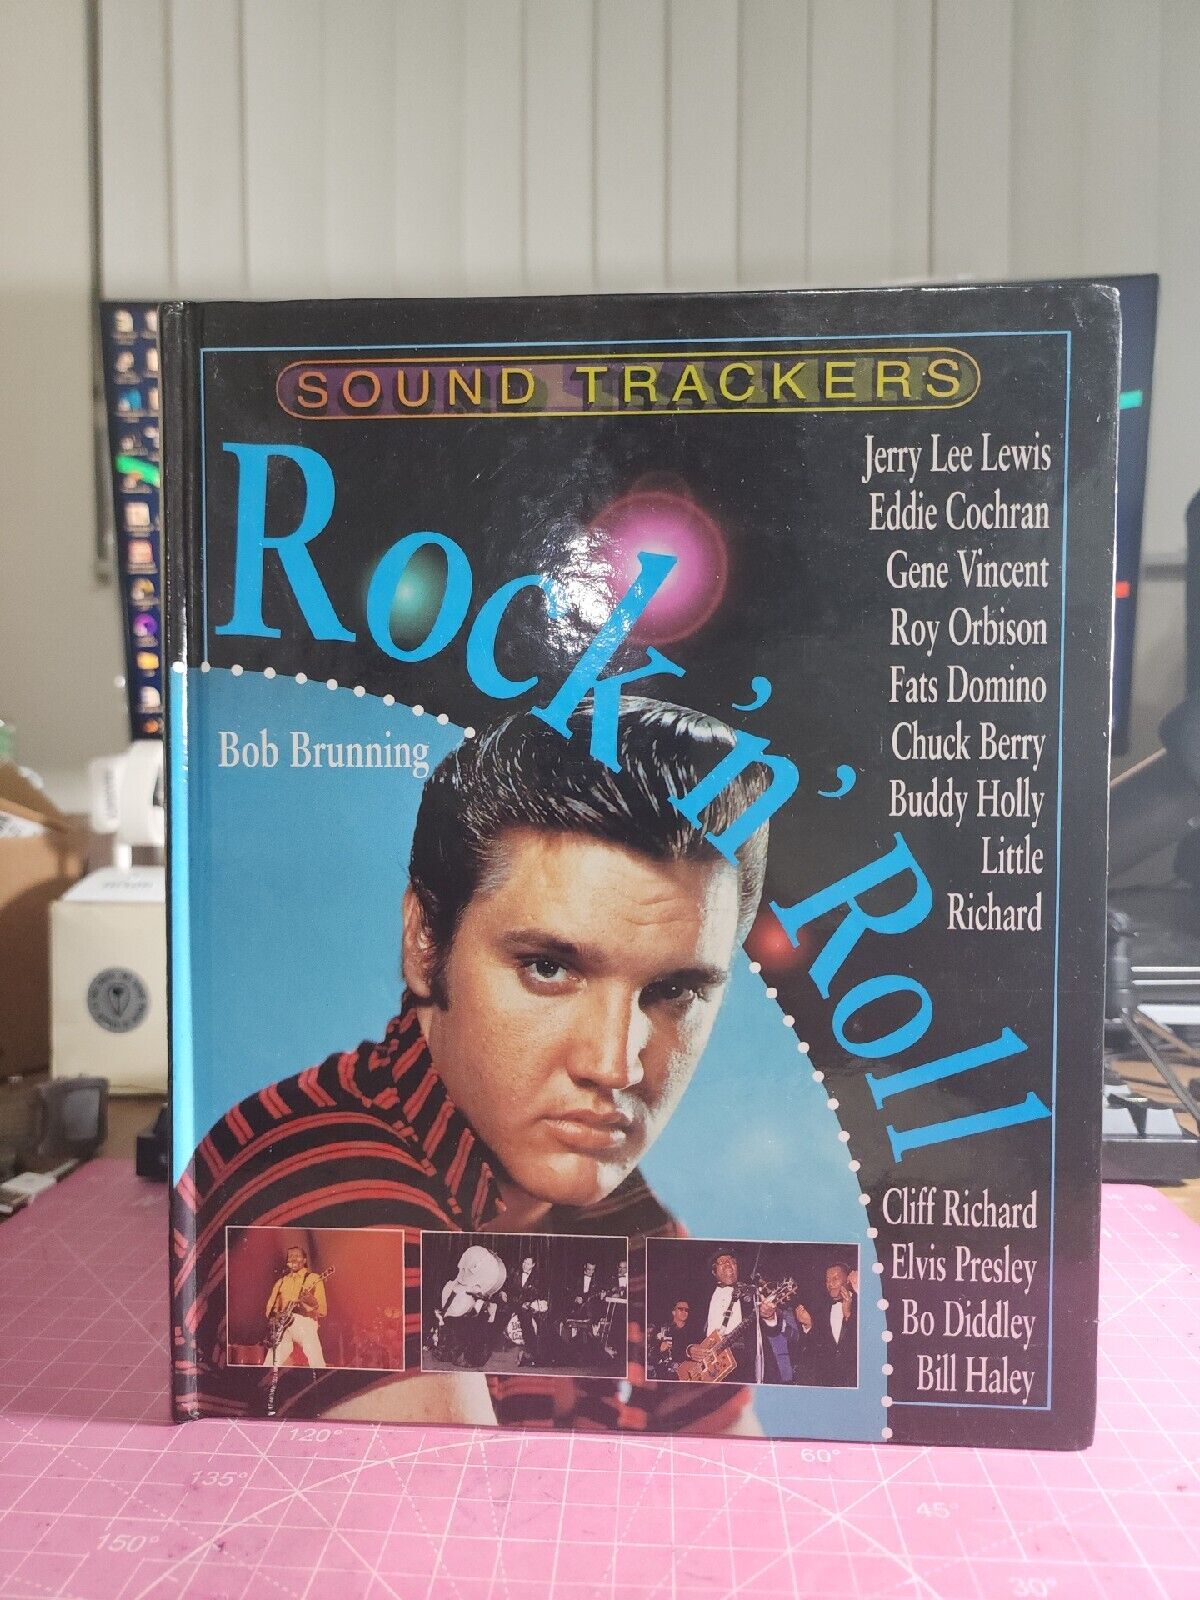 Sound Trackers - Rock 'n Roll by Bob Brunning (1999, Hardcover)